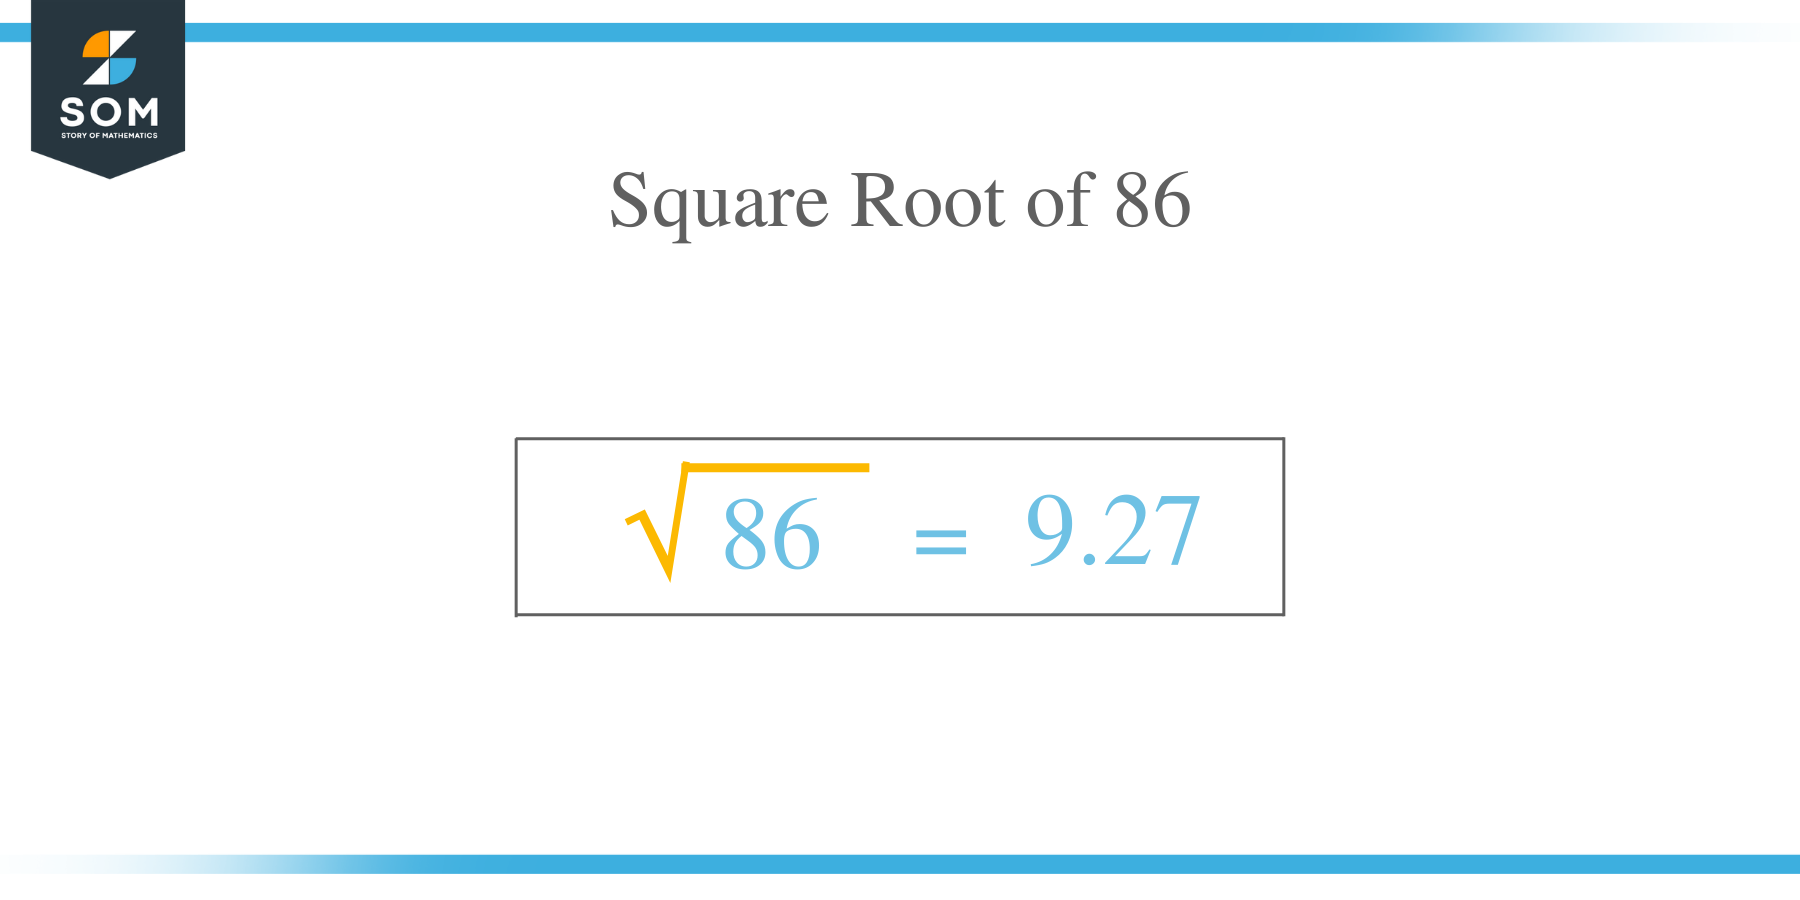 Square Root of 86